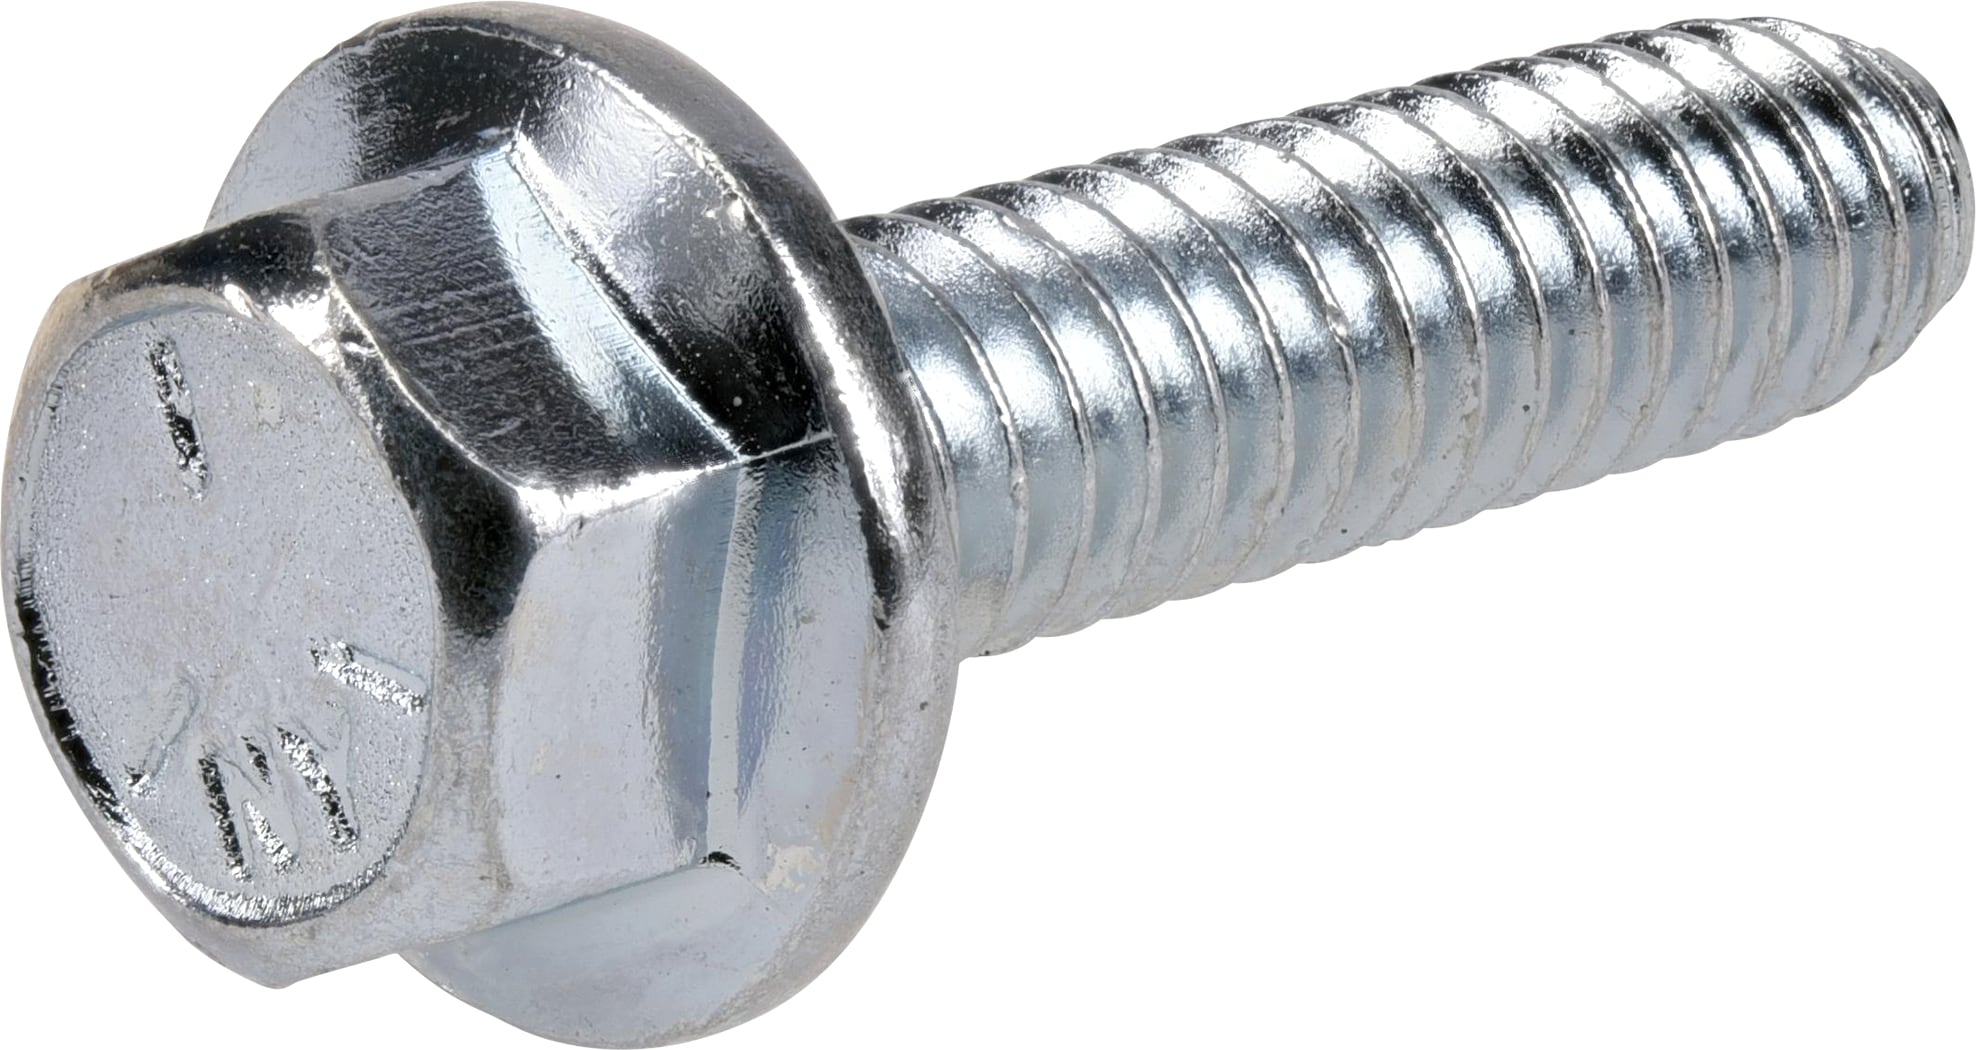 1/4-20 X 1-1/4 HEX BOLTS W/ NUTS AND WASHERS GRADE 2 ZINC PLATED COURSE THREAD 